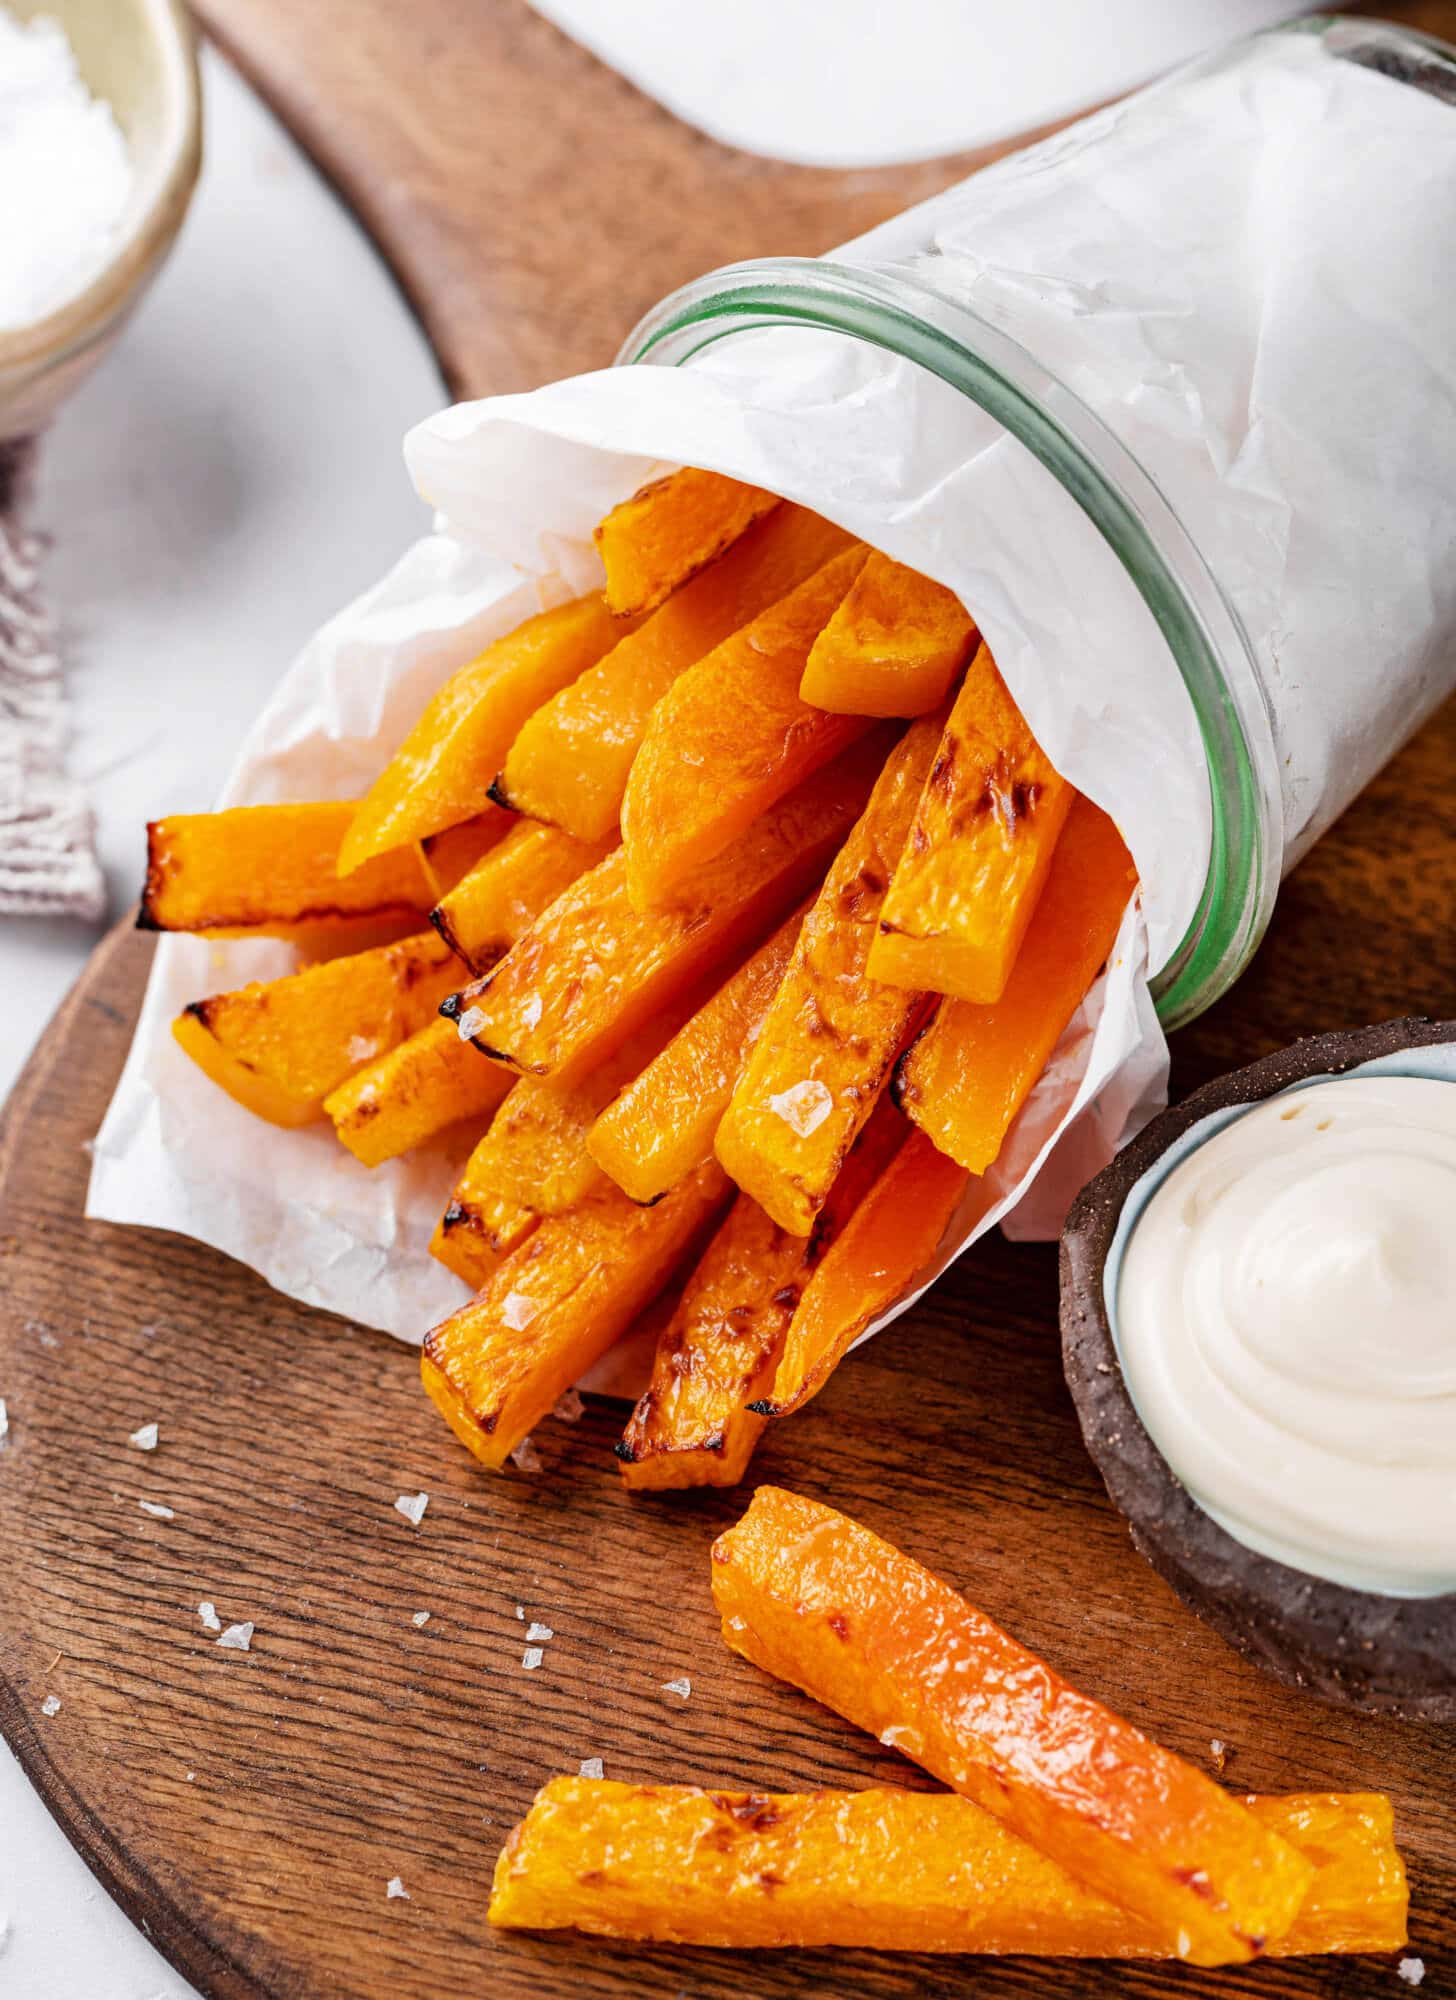 butternut-squash-fries-on-a-wooden-board-in-a-cup-with-sauce-on-the-side